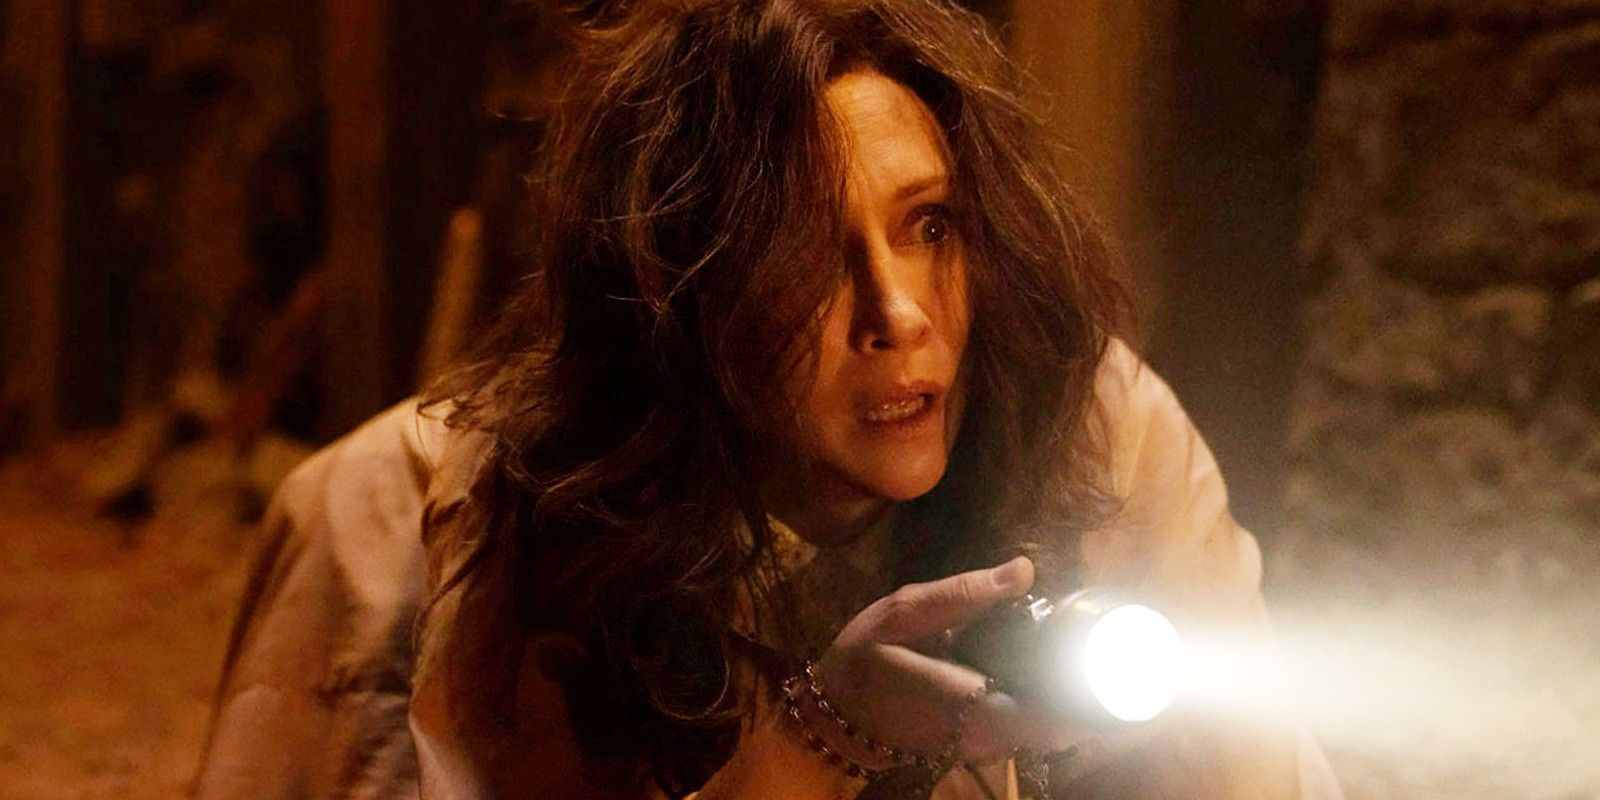 Conjuring 3: The Warrens Face an Entirely New Kind of Danger